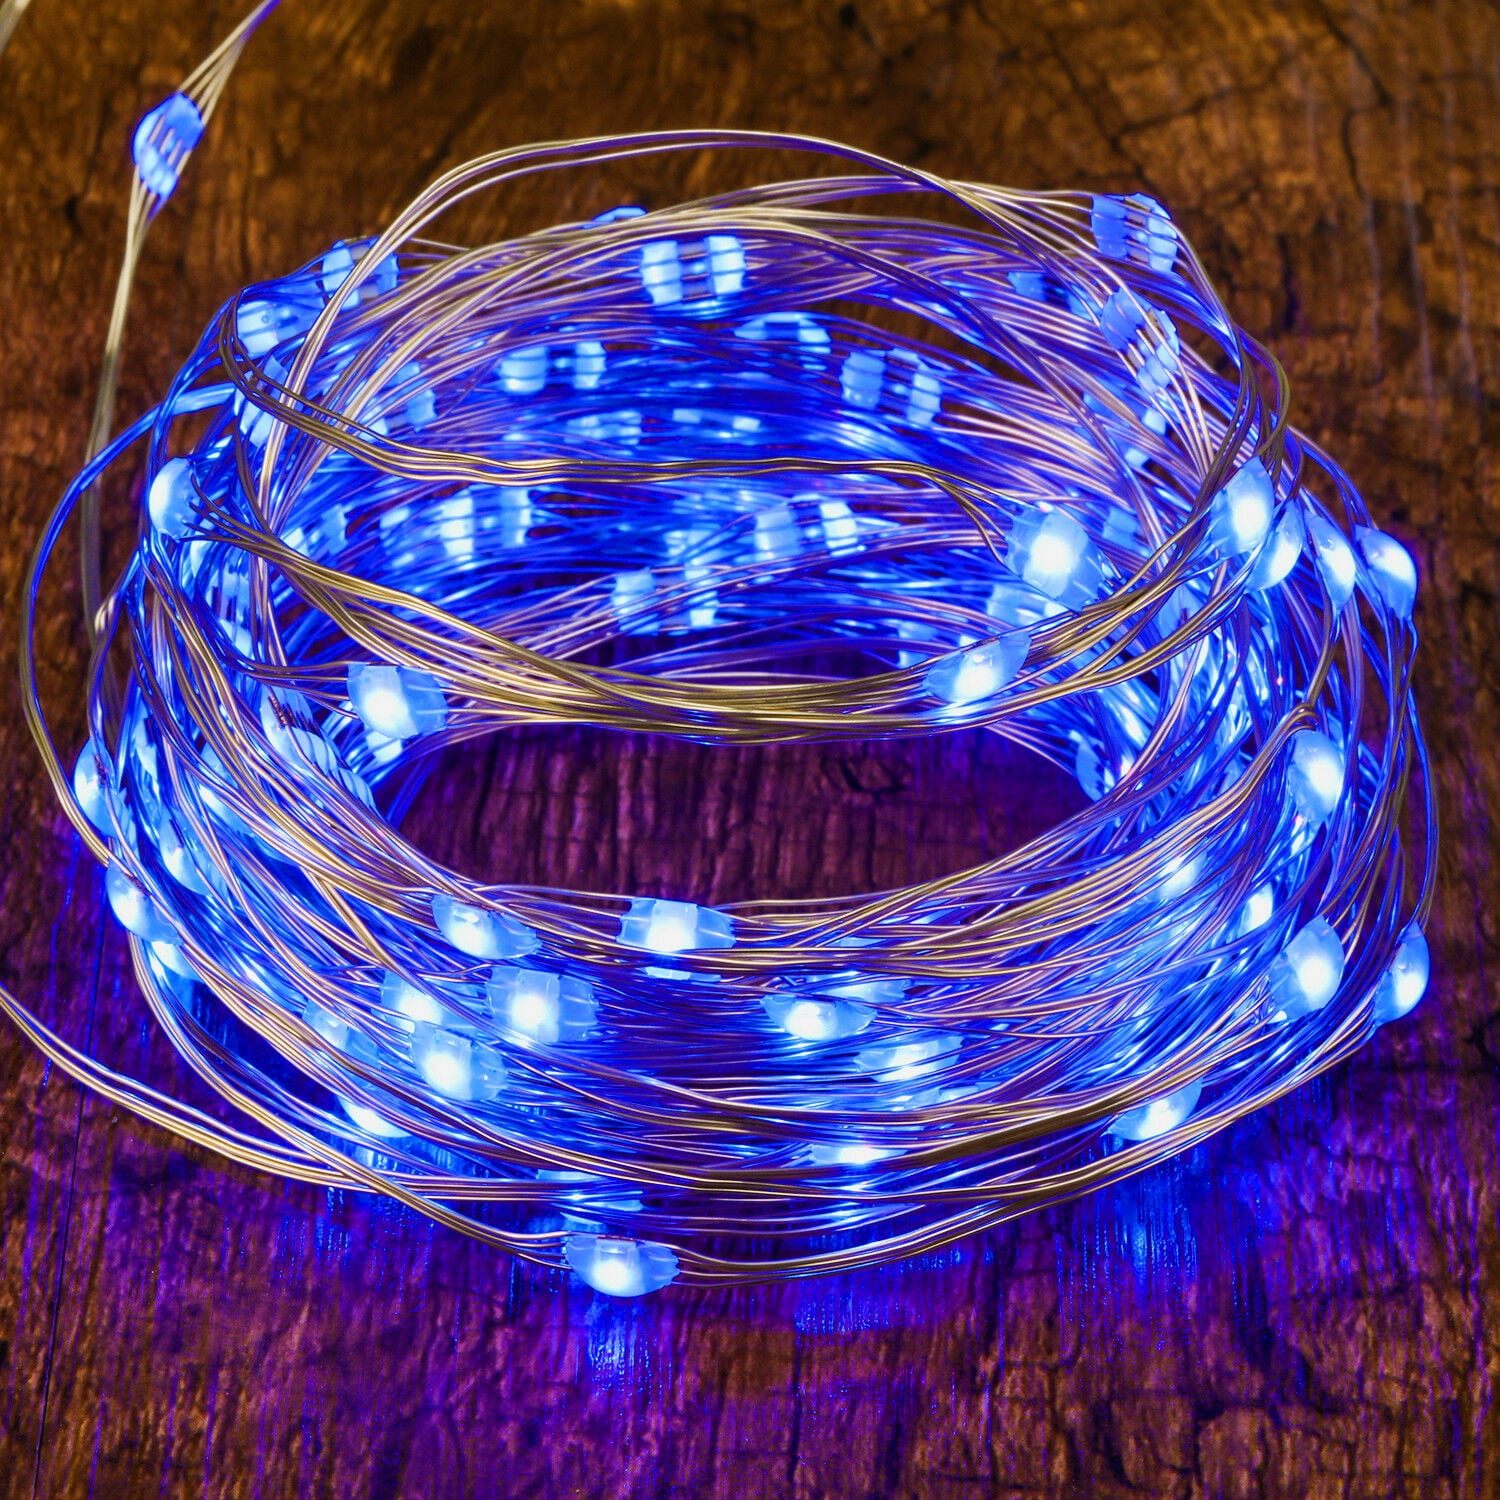 MULTI COLORED FLOWERS LED STRING LIGHTS 20 LIGHTS 4 1/2' SILVER WIRE